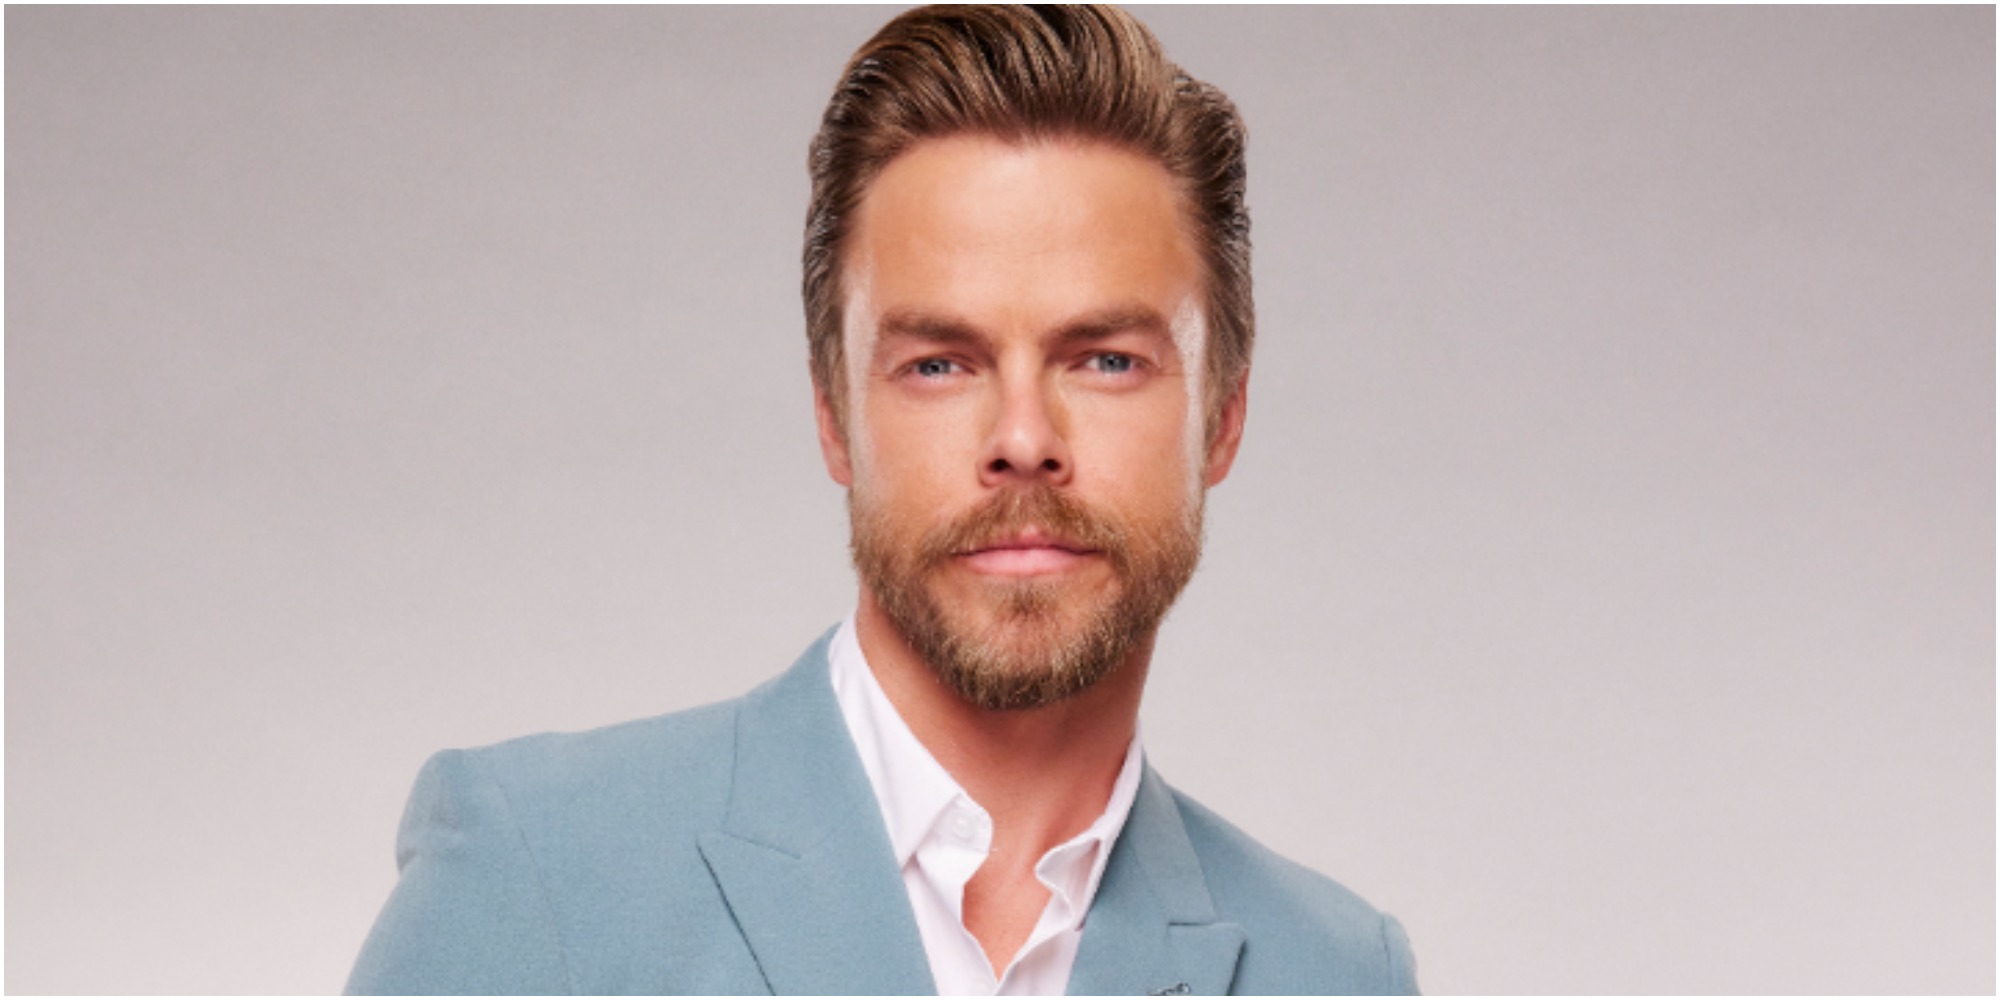 Derek Hough poses in a promotional photo for season 30 of "DWTS."